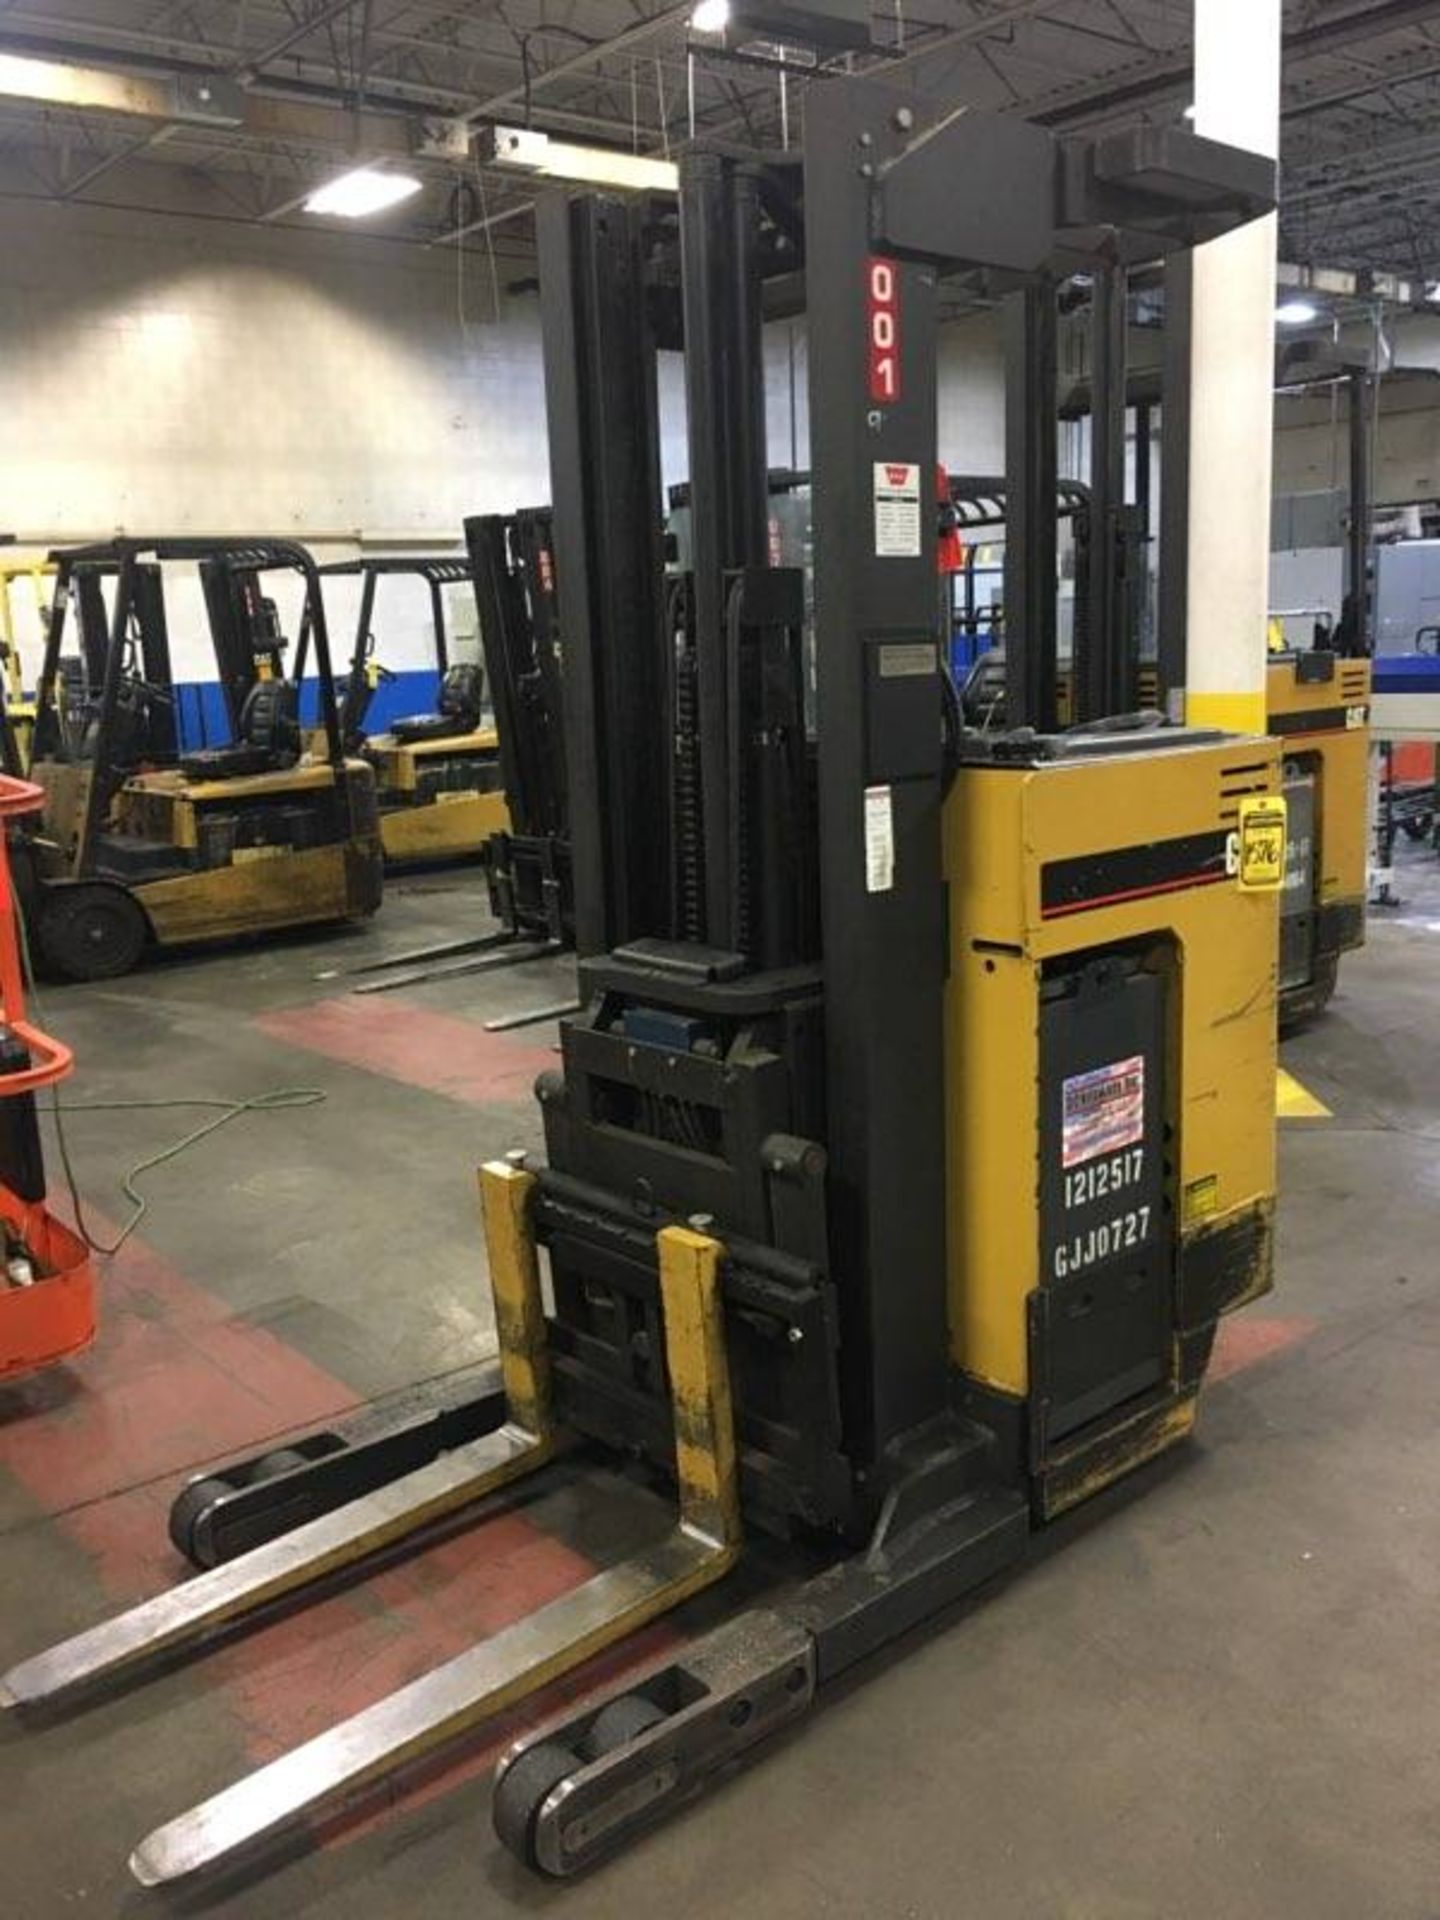 CATERPILLAR 3,000-LB. CAPACITY ELECTRIC REACH TRUCK, 24V., 192'' MAX LOAD HEIGHT, MODEL NRR30, S/N